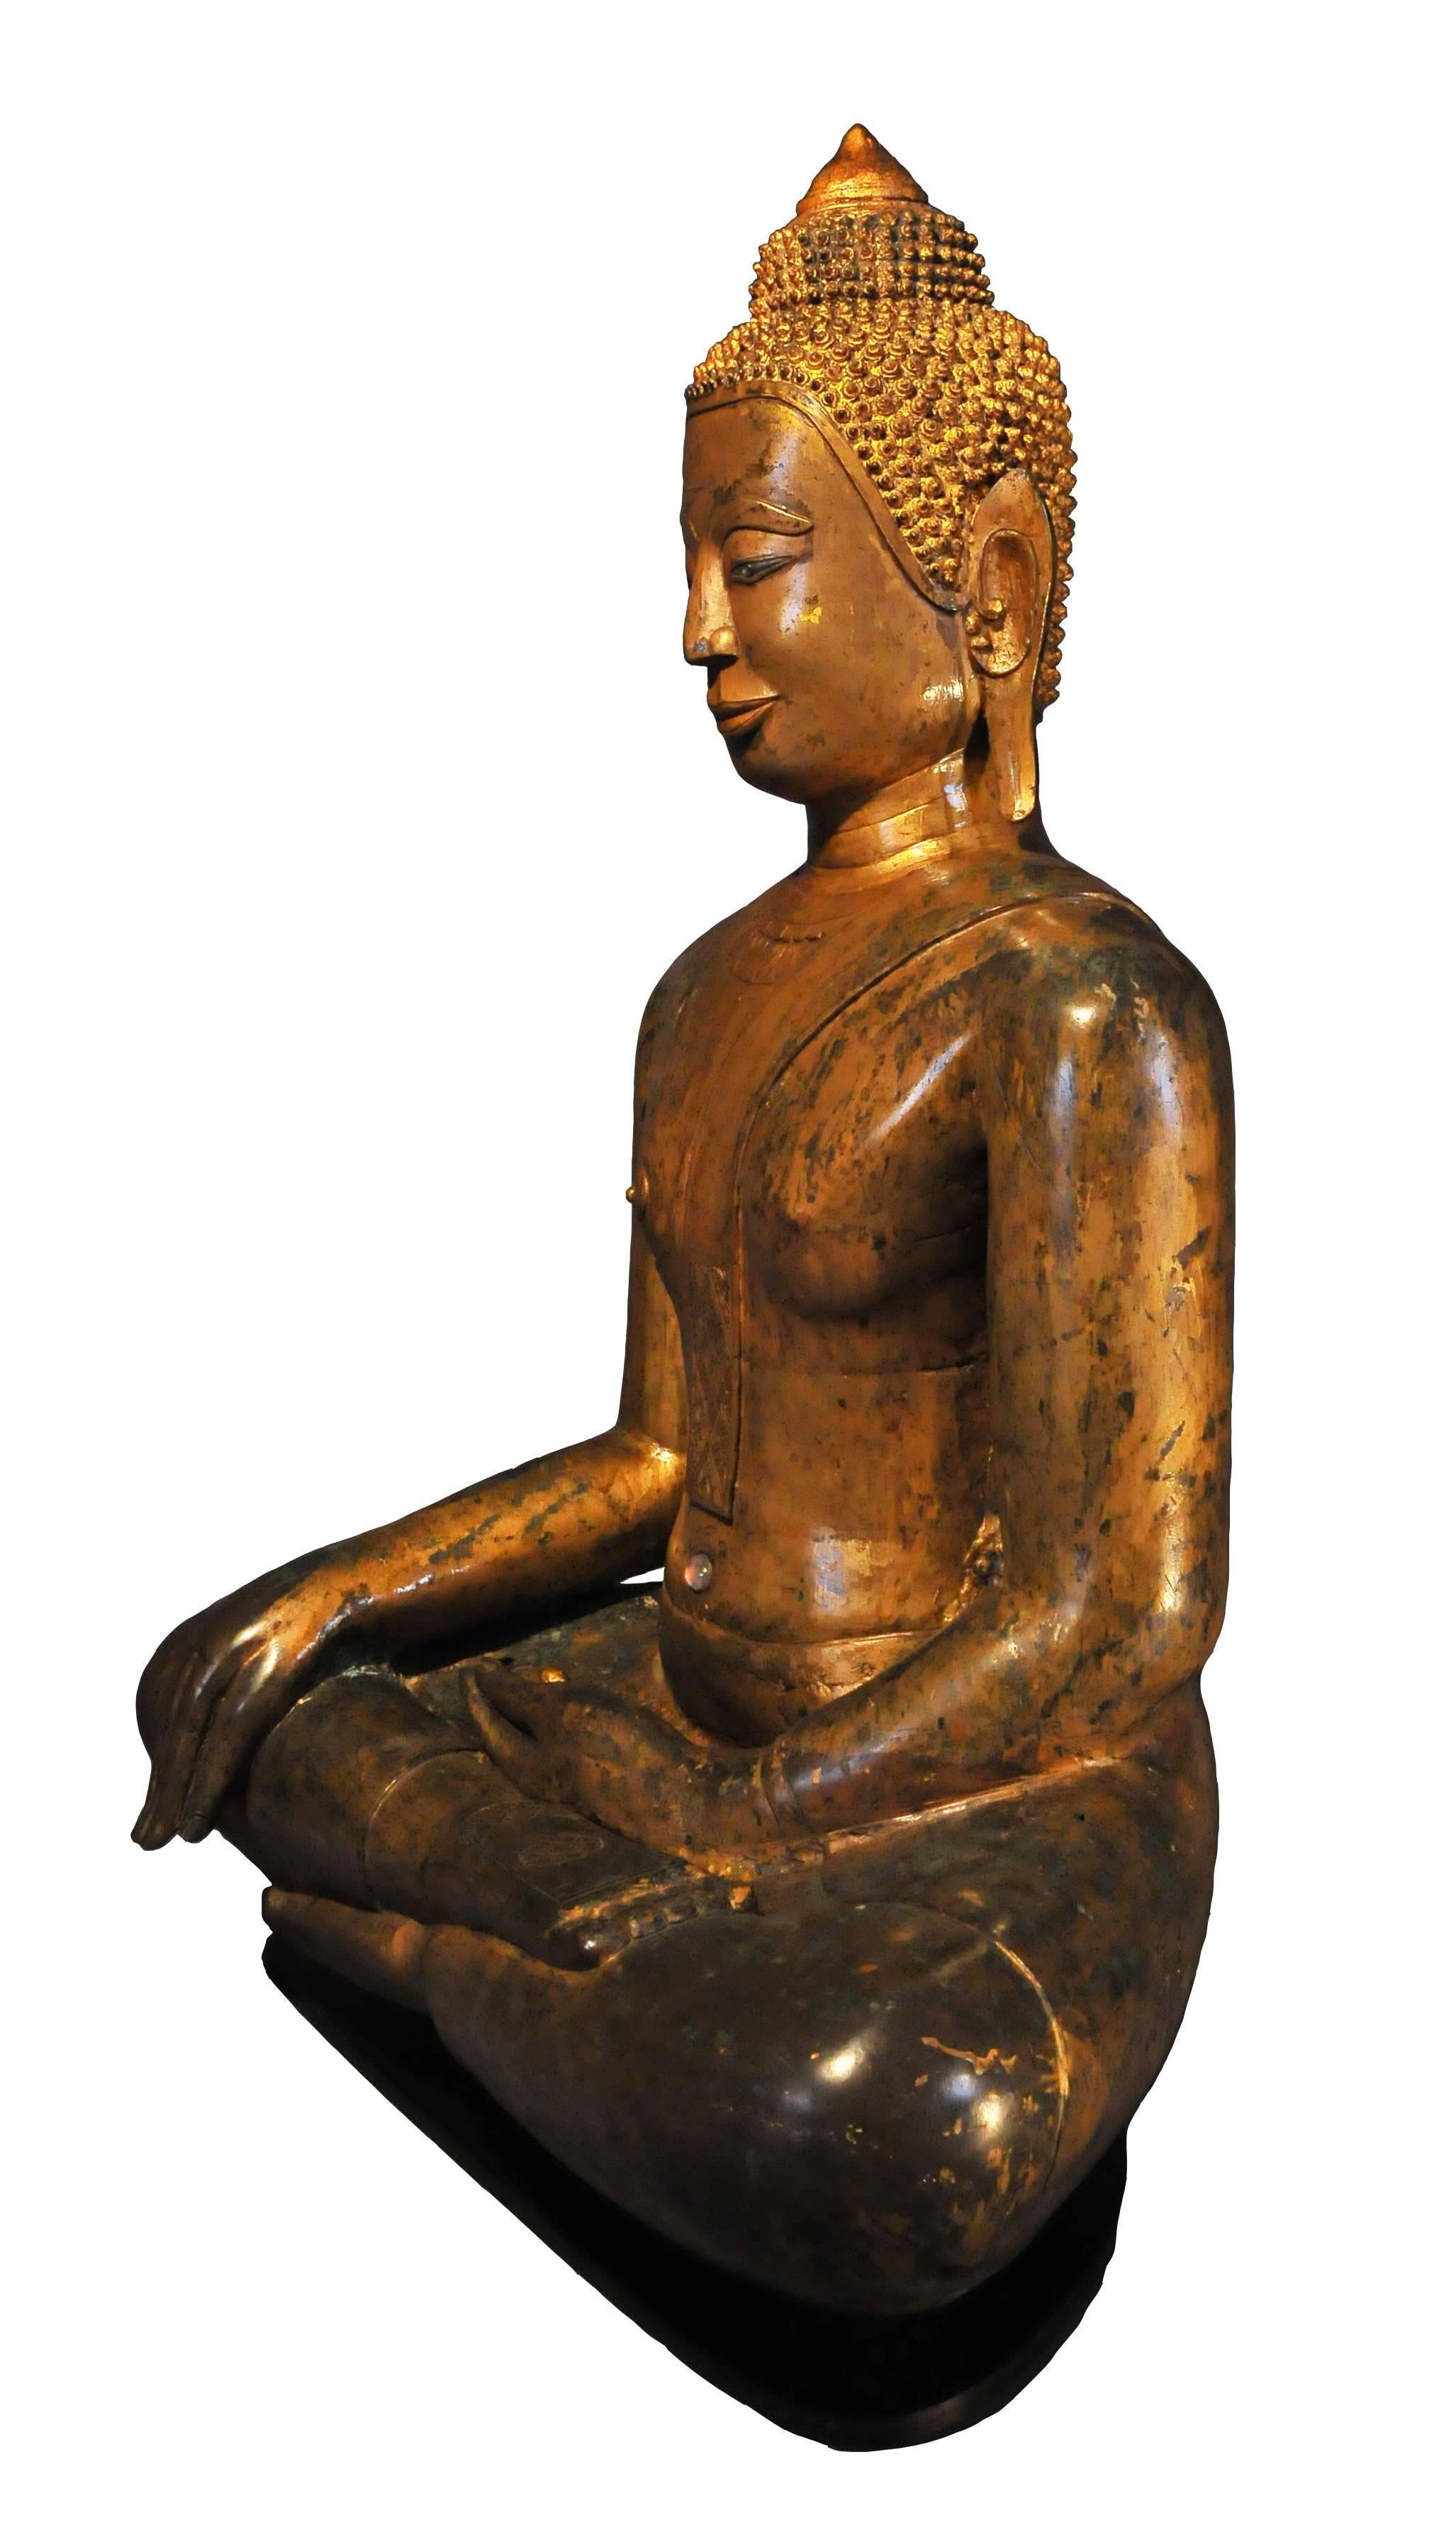 With the period of Phnom Udong, Buddhist art is at its peak and the themes of Buddhism are put forward although the Hindu legends are still represented. This style is marked by monumental works where the aesthetic shows a true return to